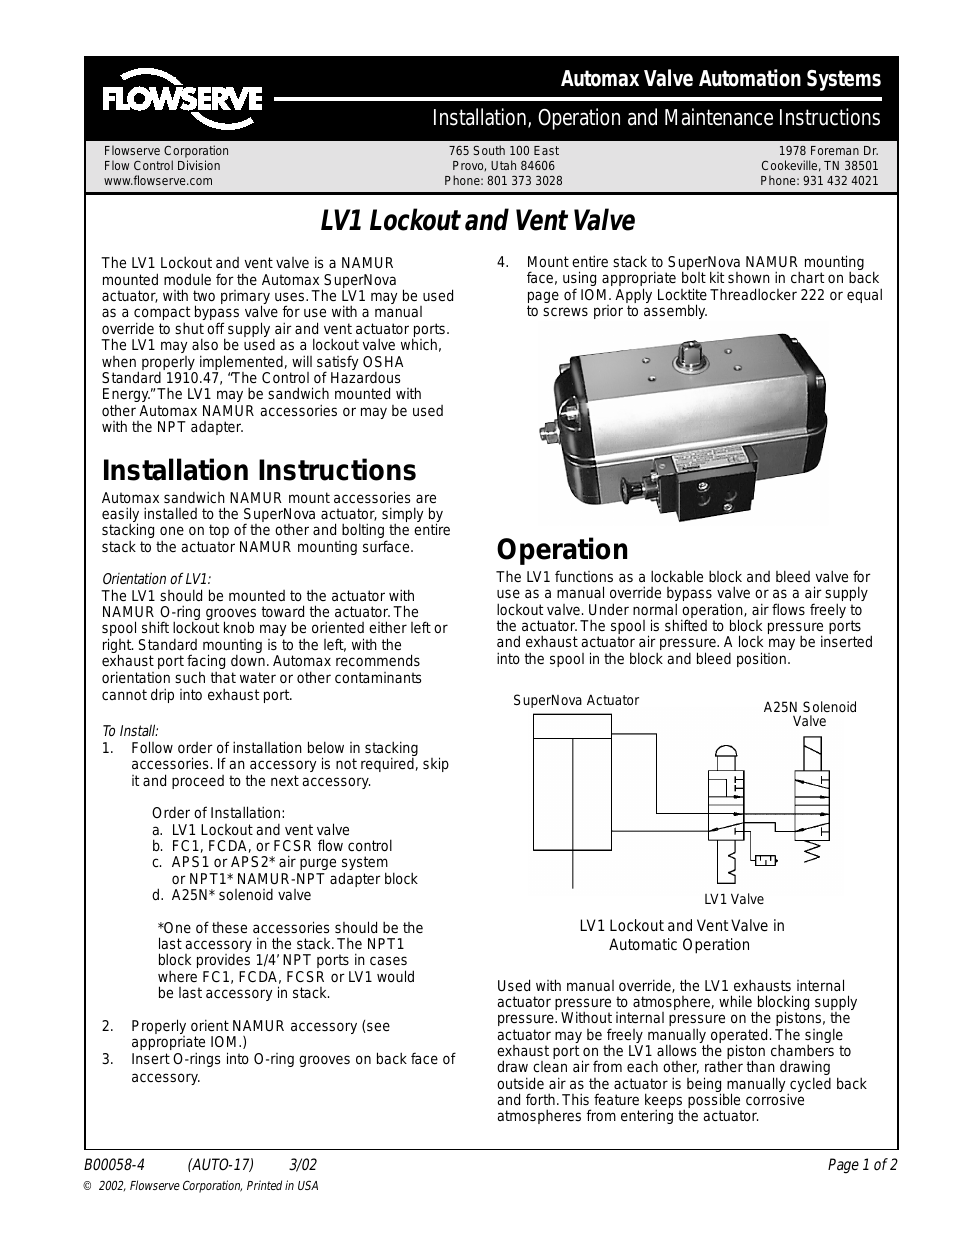 LV1 Lockout and Vent Valve